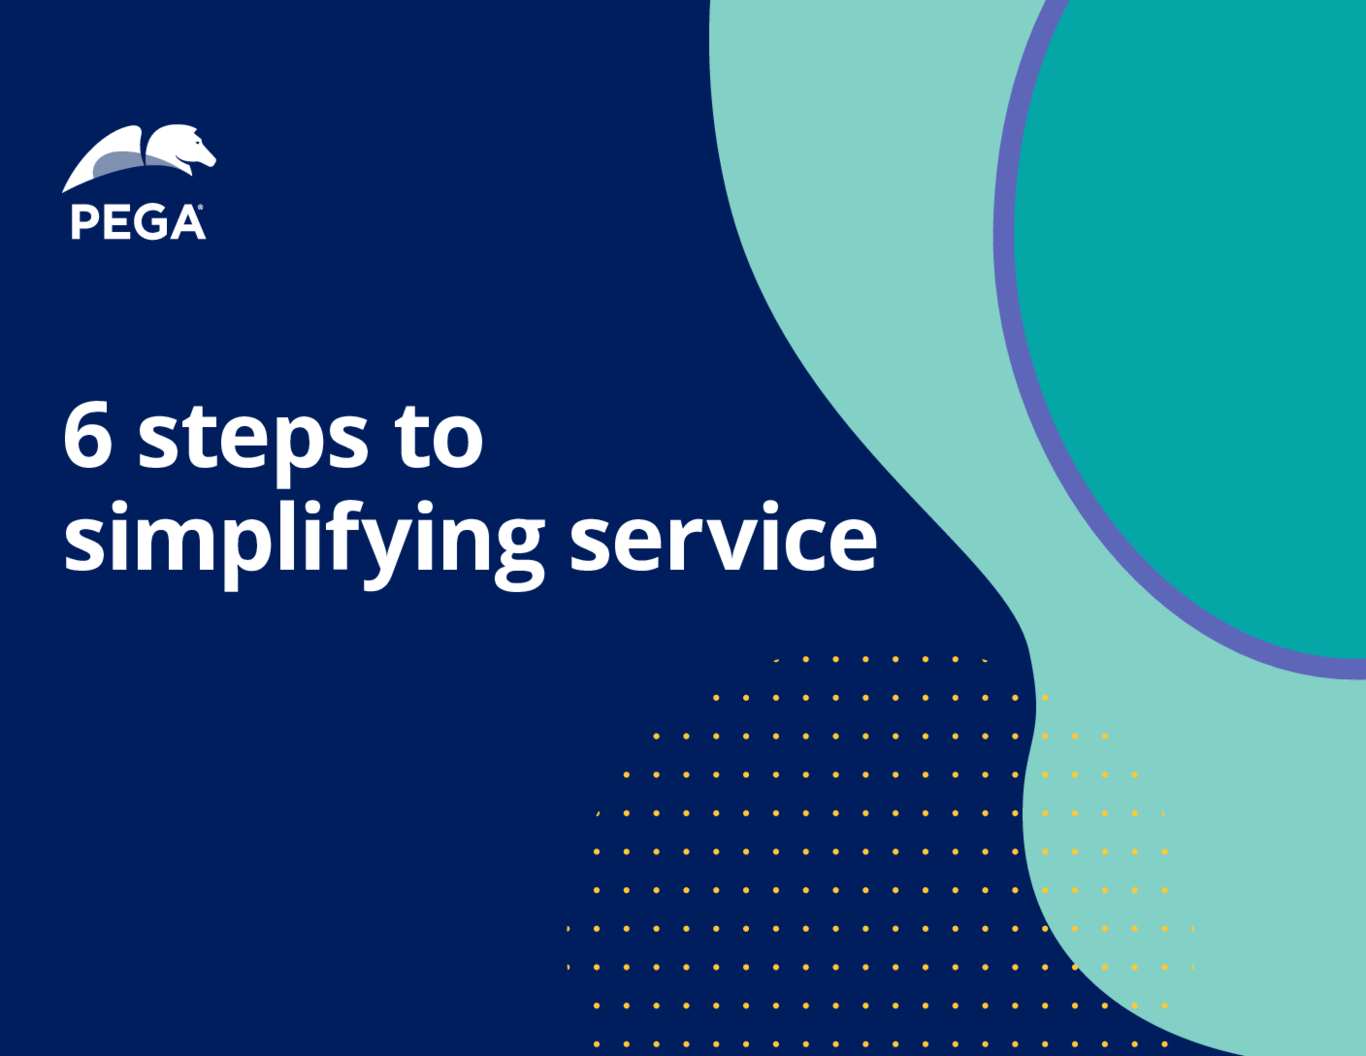 CSPs: Simplify service, once and for all